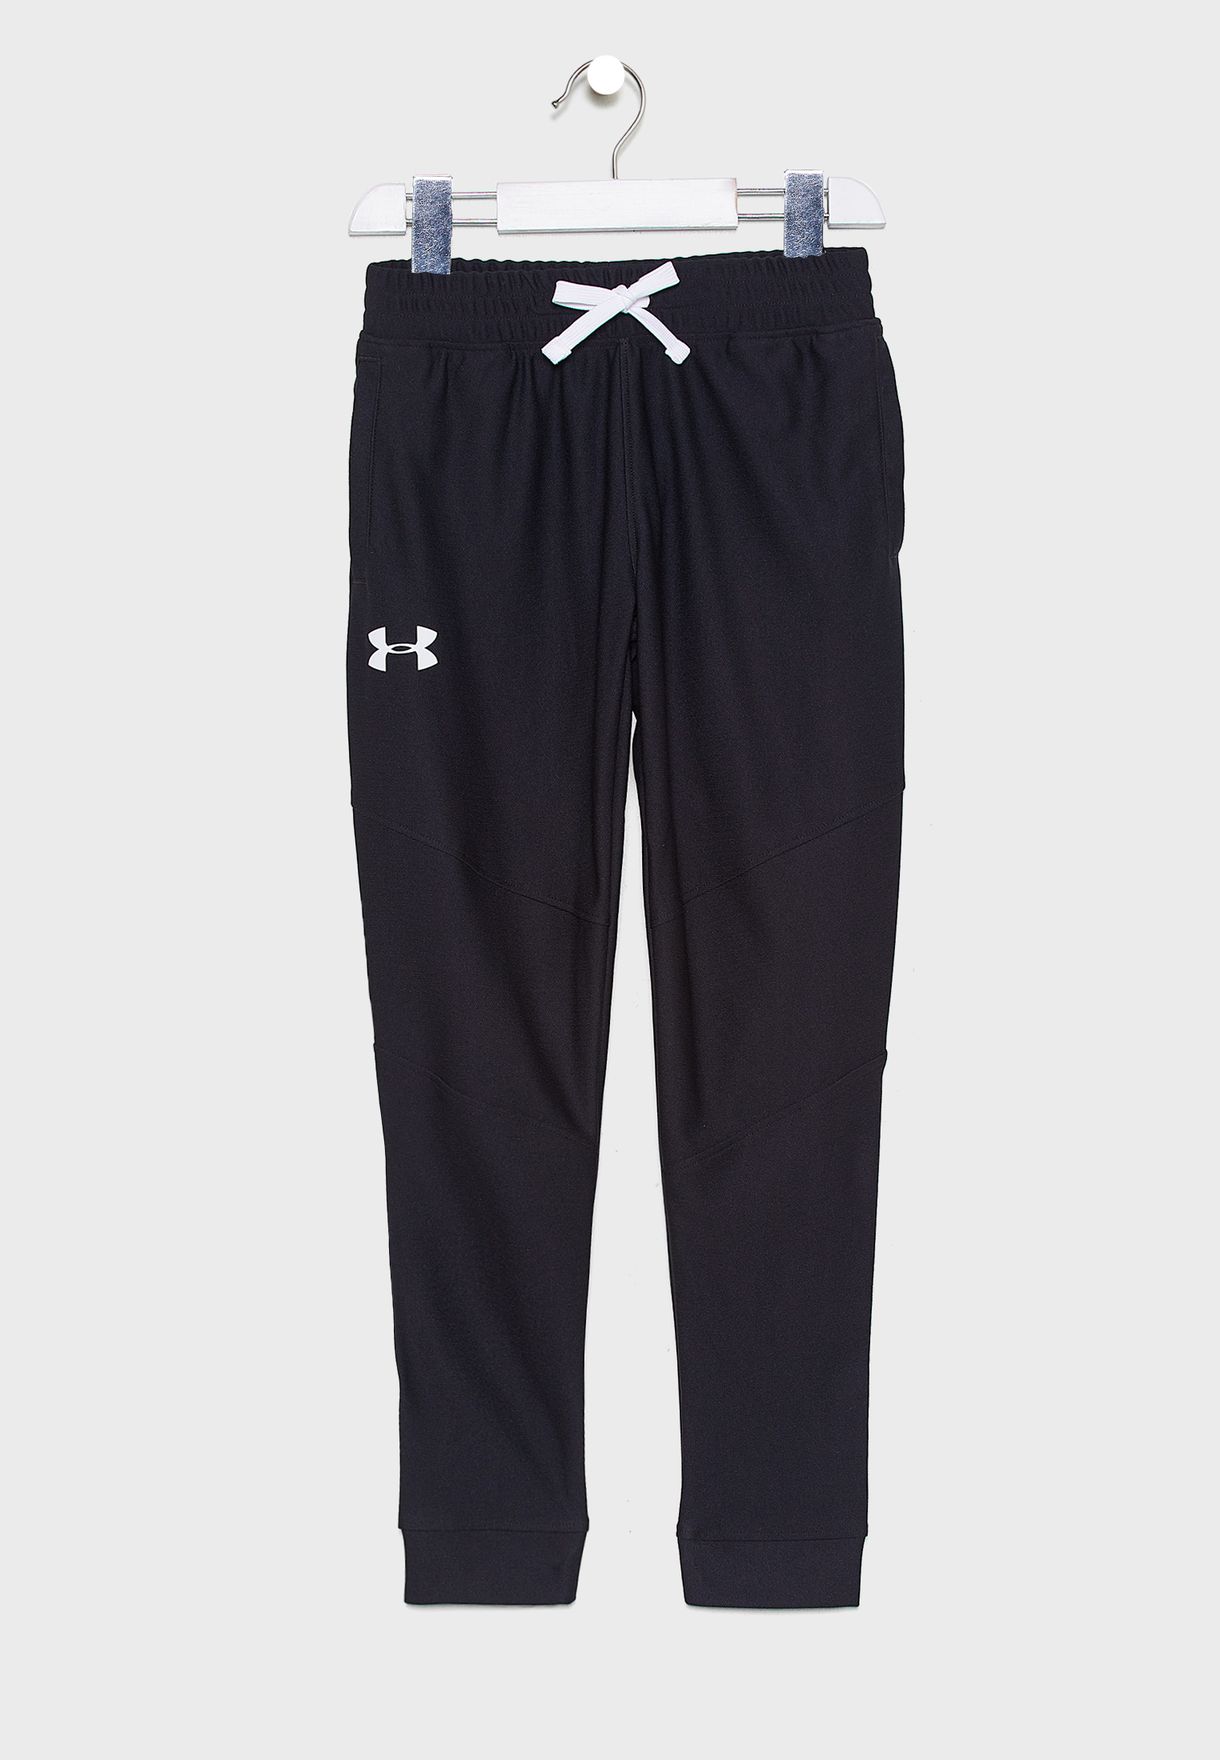 under armour youth sweatpants